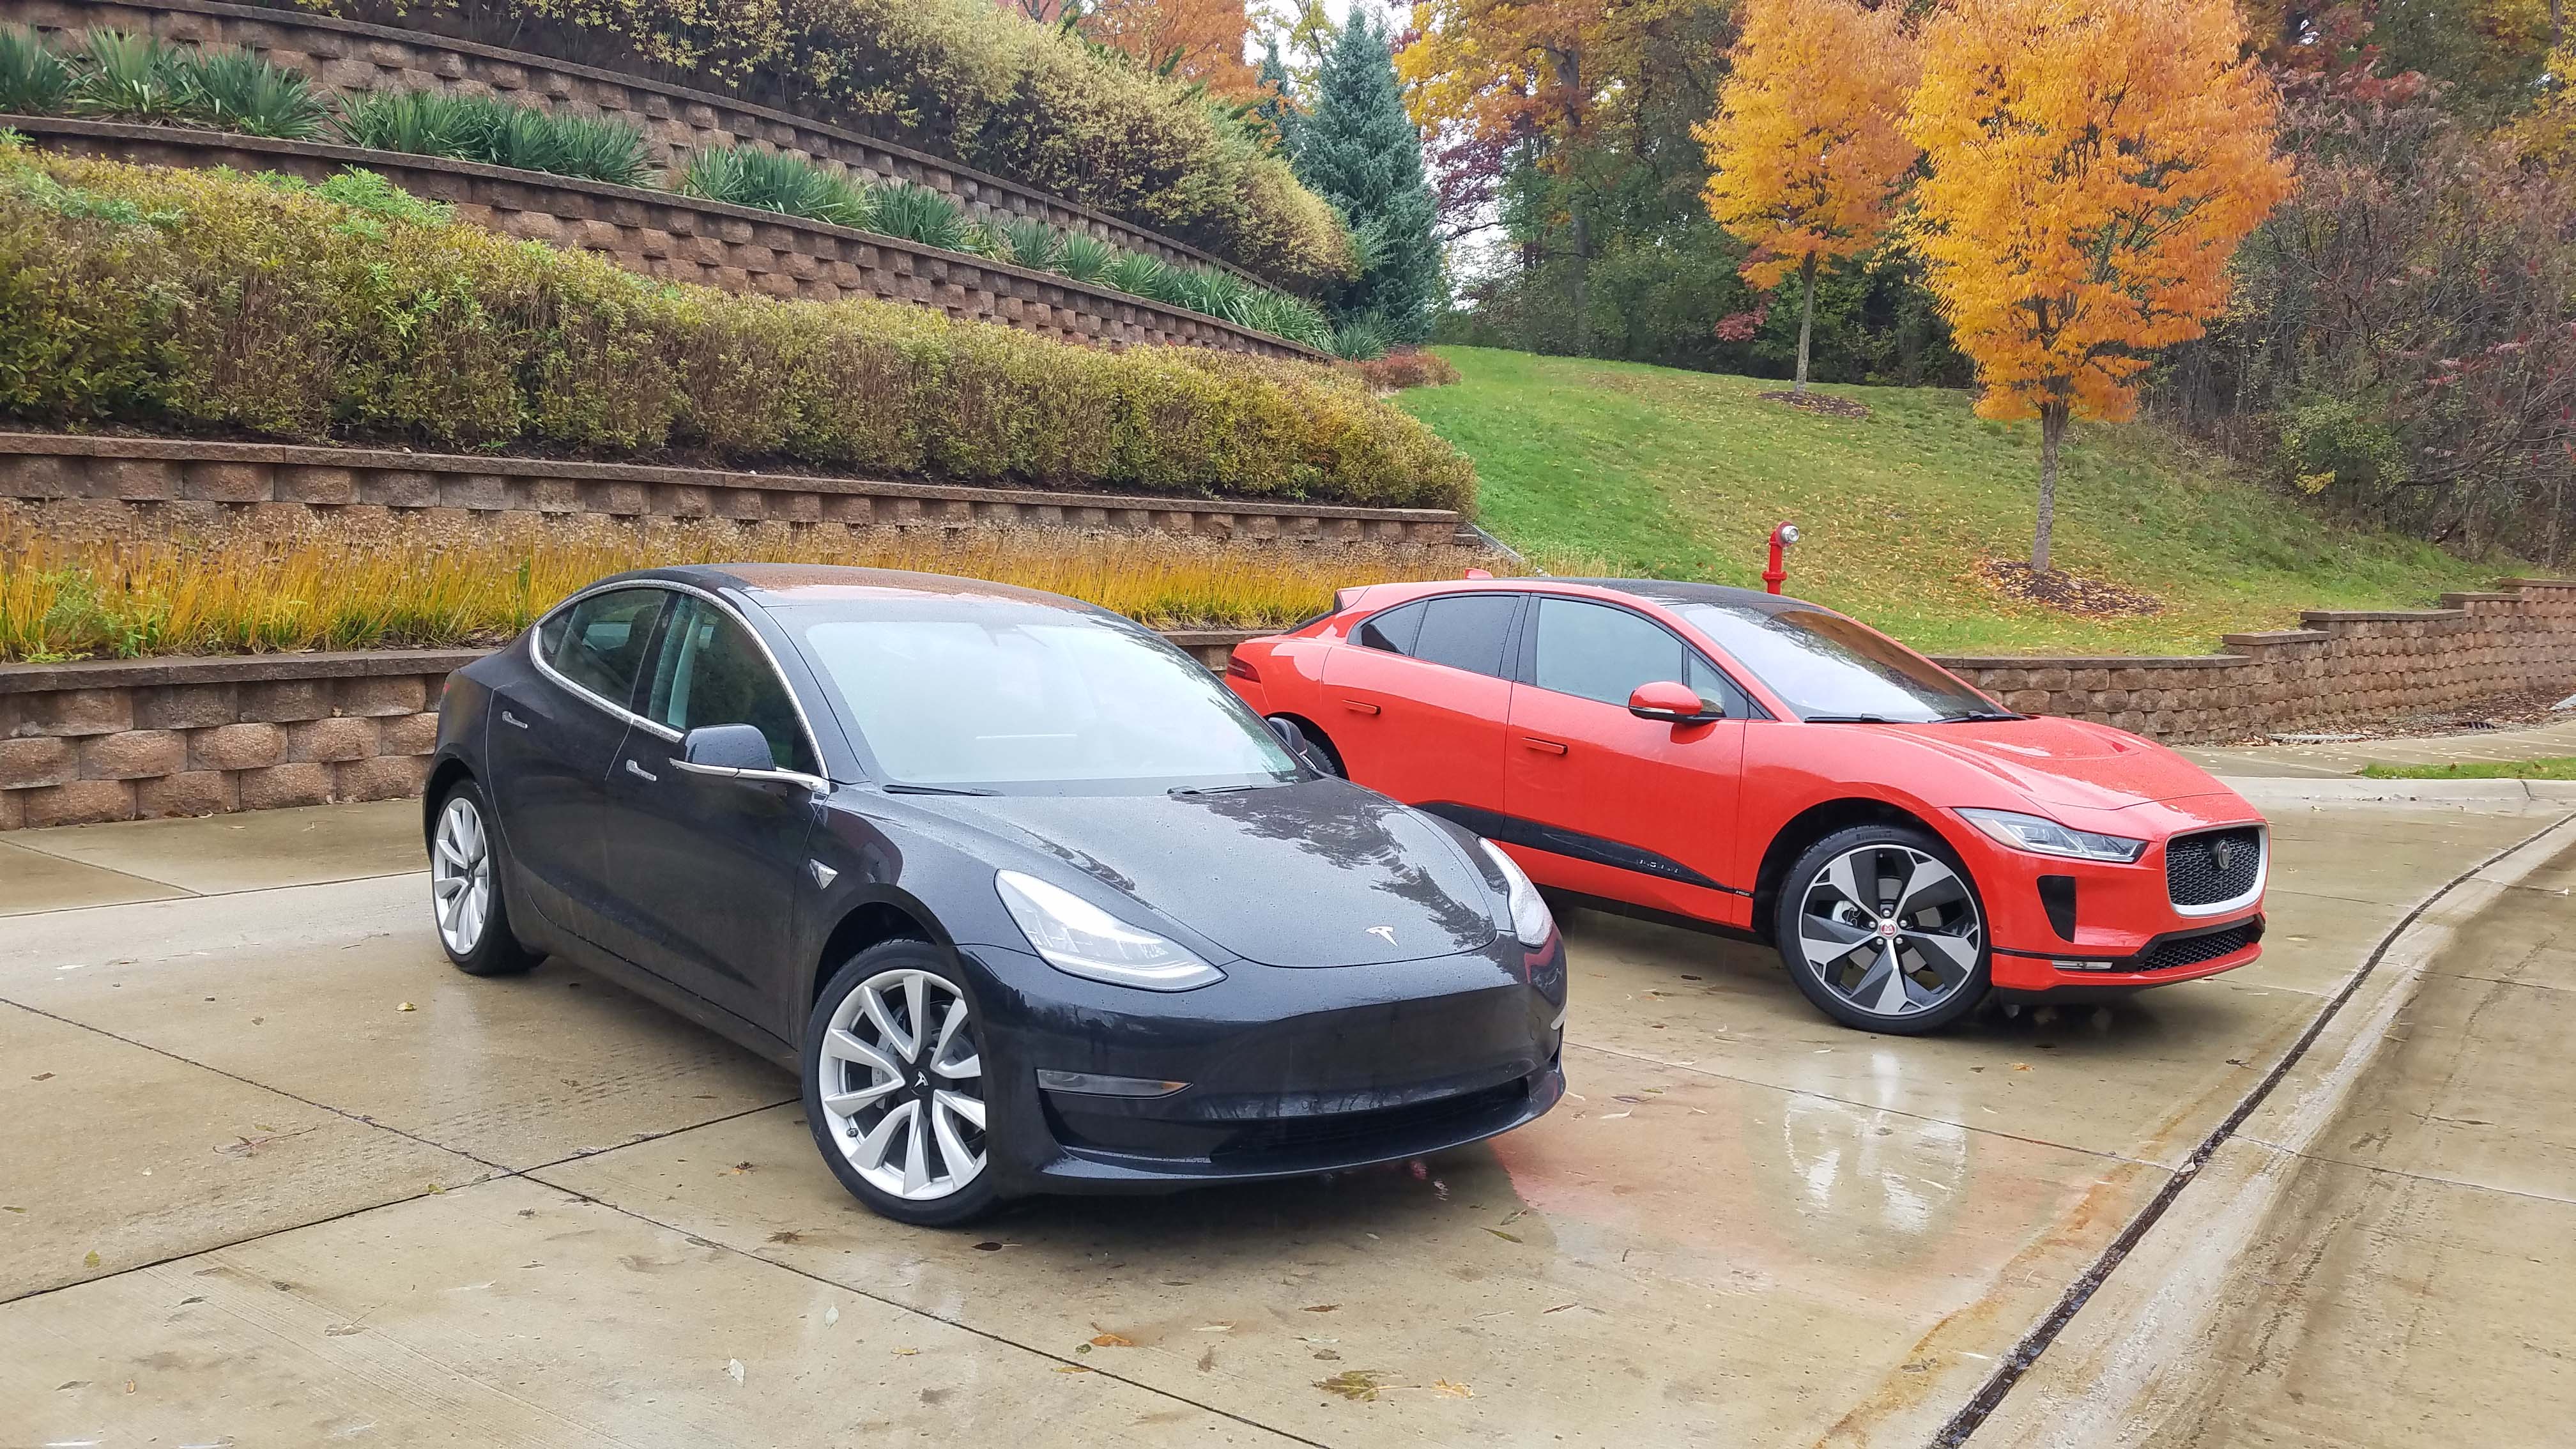 The Tesla Model 3 and Jaguar I-Pace are two of the latest EVs on the market.